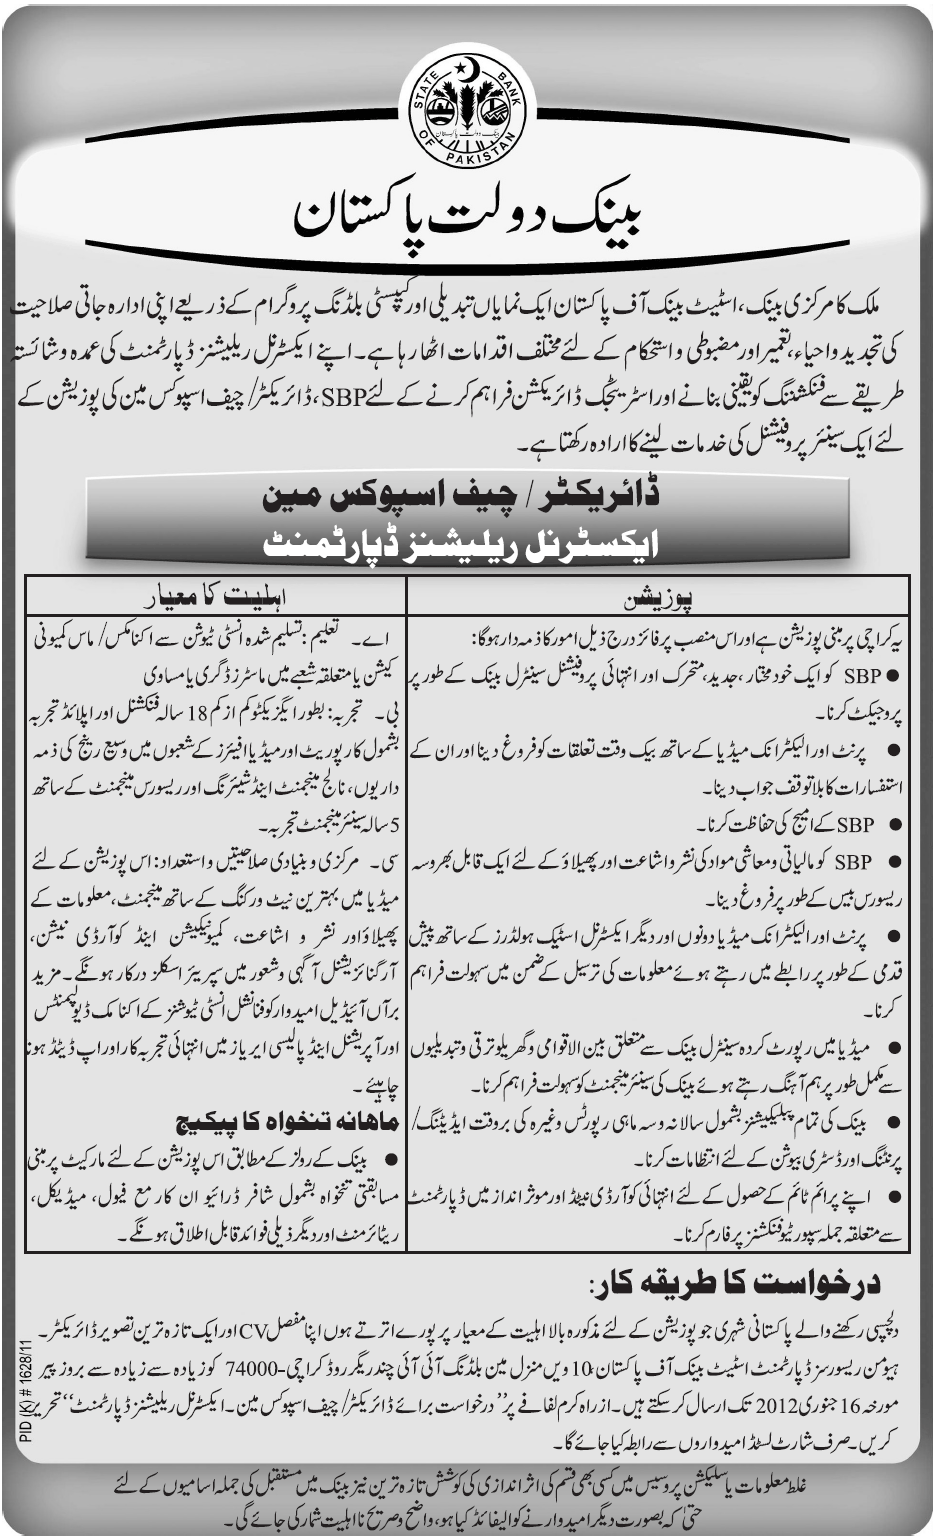 State Bank of Pakistan Required the Services of Director/Chief Spokesman